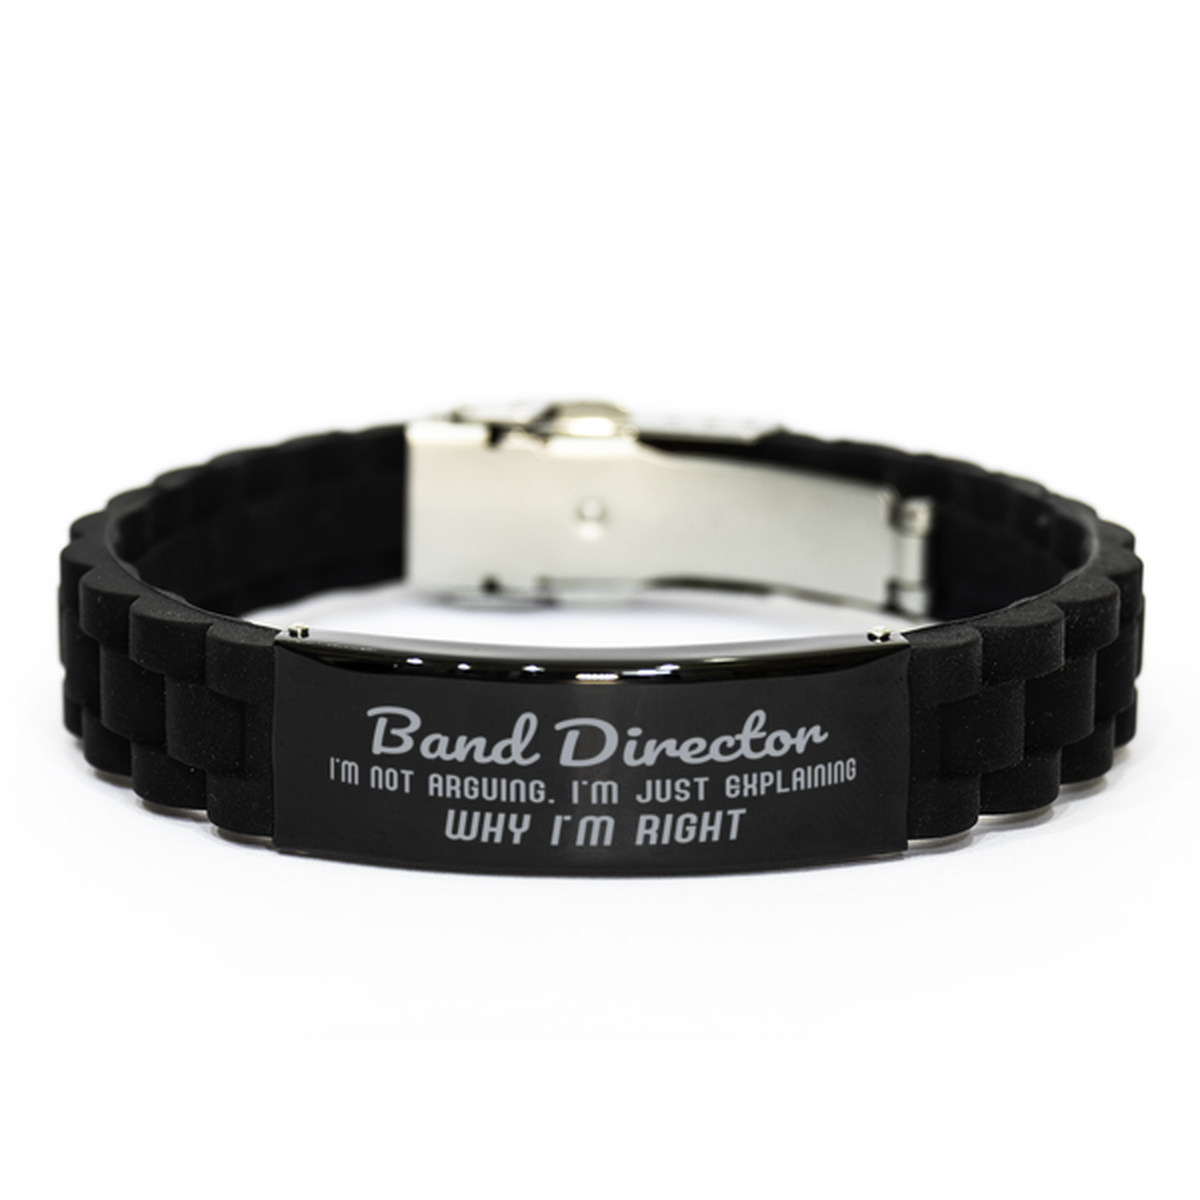 Band Director I'm not Arguing. I'm Just Explaining Why I'm RIGHT Black Glidelock Clasp Bracelet, Funny Saying Quote Band Director Gifts For Band Director Graduation Birthday Christmas Gifts for Men Women Coworker